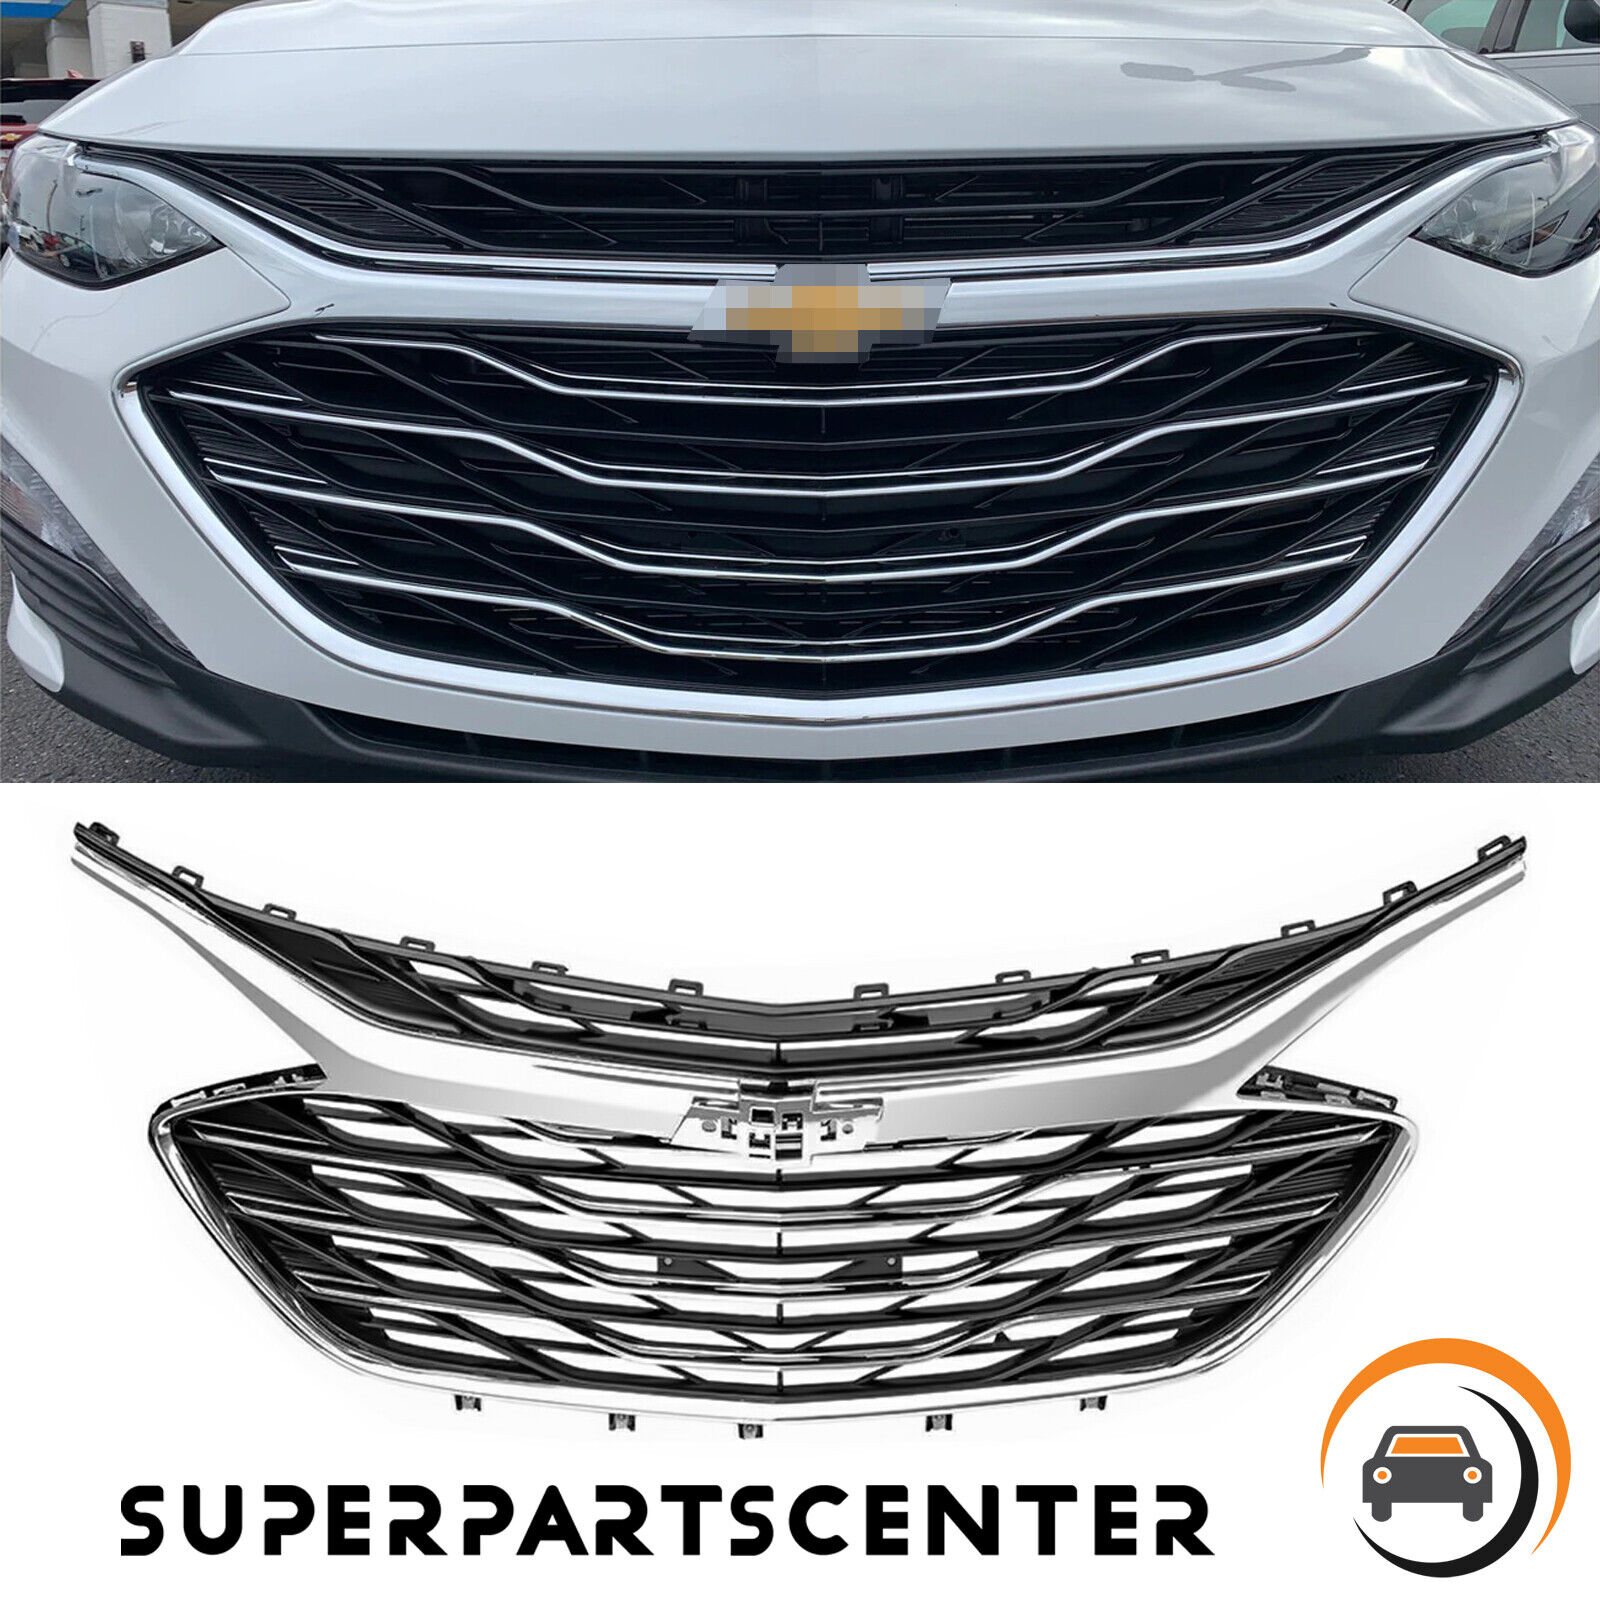 3 Pcs Chrome Front Grille Upper Lower Grill For Chevrolet Malibu 2019 2020-2023